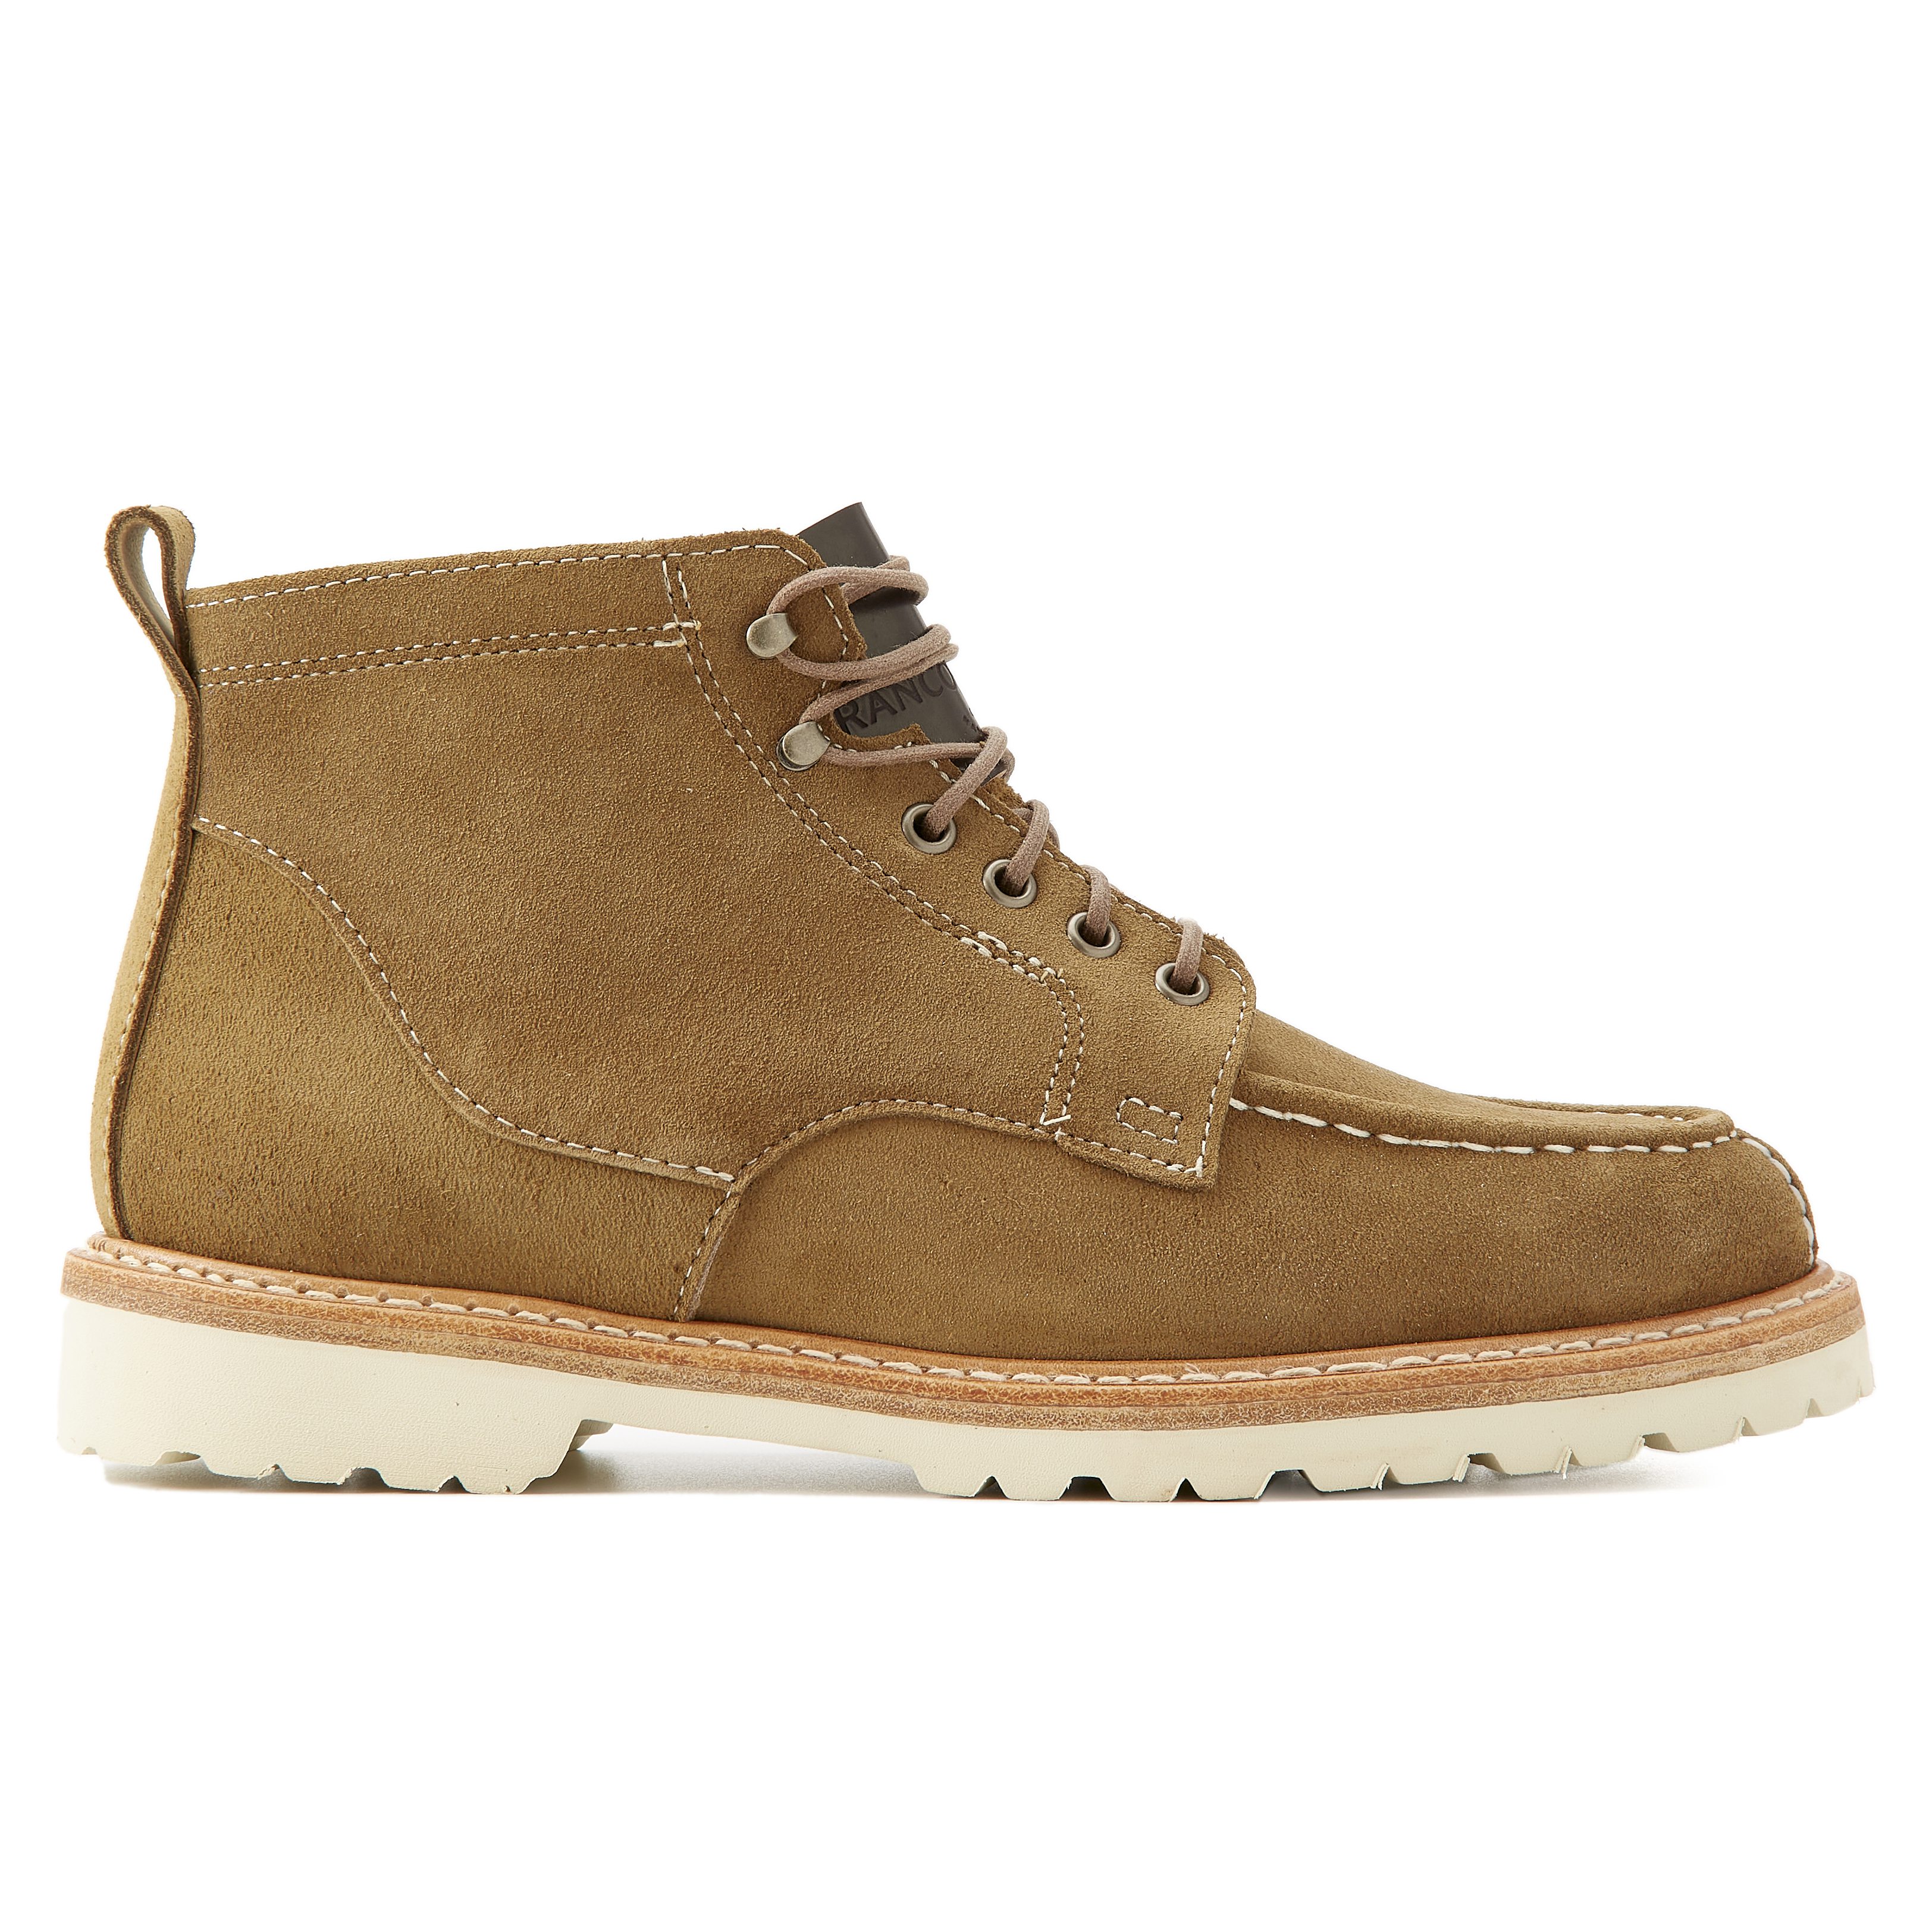 Rancourt & Co. Dunnage Boot - Mohave Olive | Work Boots | Huckberry